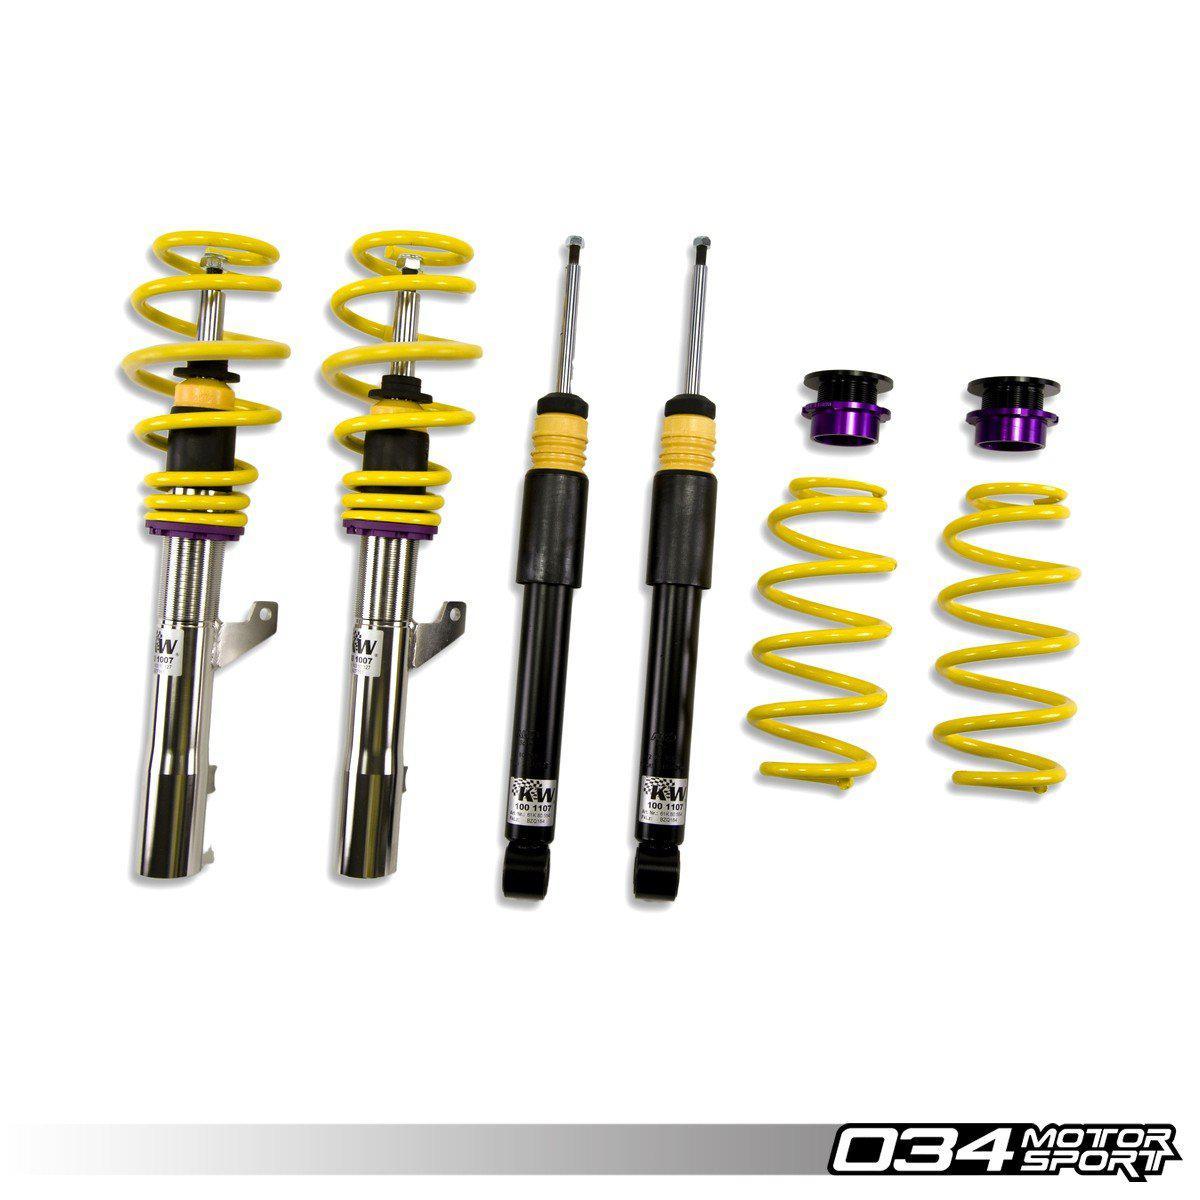 KW Variant 2 Coilover Suspension, B8 Audi A4/A5/S4/S5 FWD & Quattro With Electronic Dampening-A Little Tuning Co